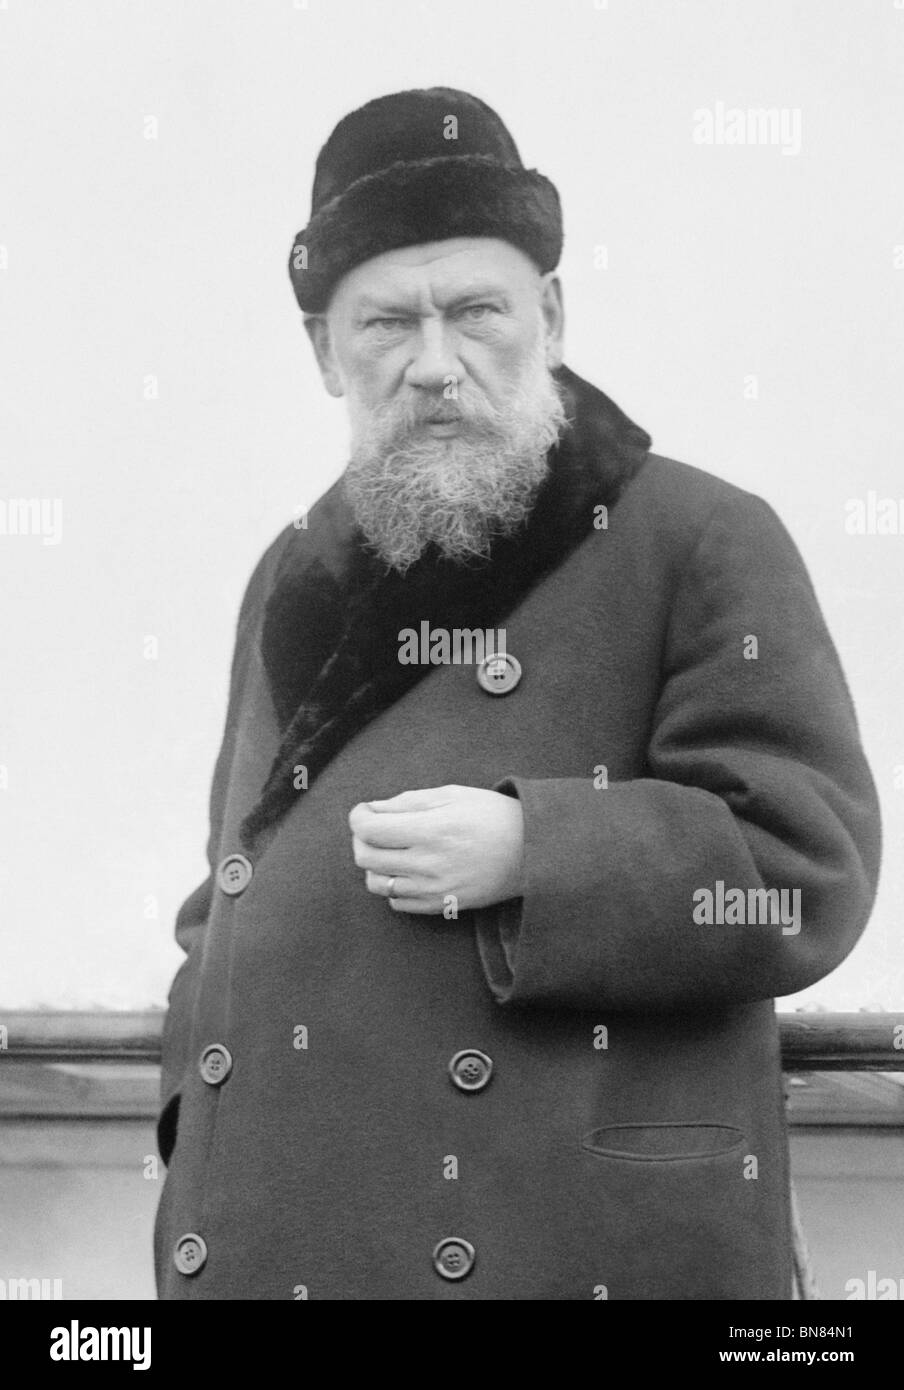 Russian writer Leo Tolstoy (1828 - 1910) - author of War and Peace and regarded as one of the greatest ever novelists. Stock Photo